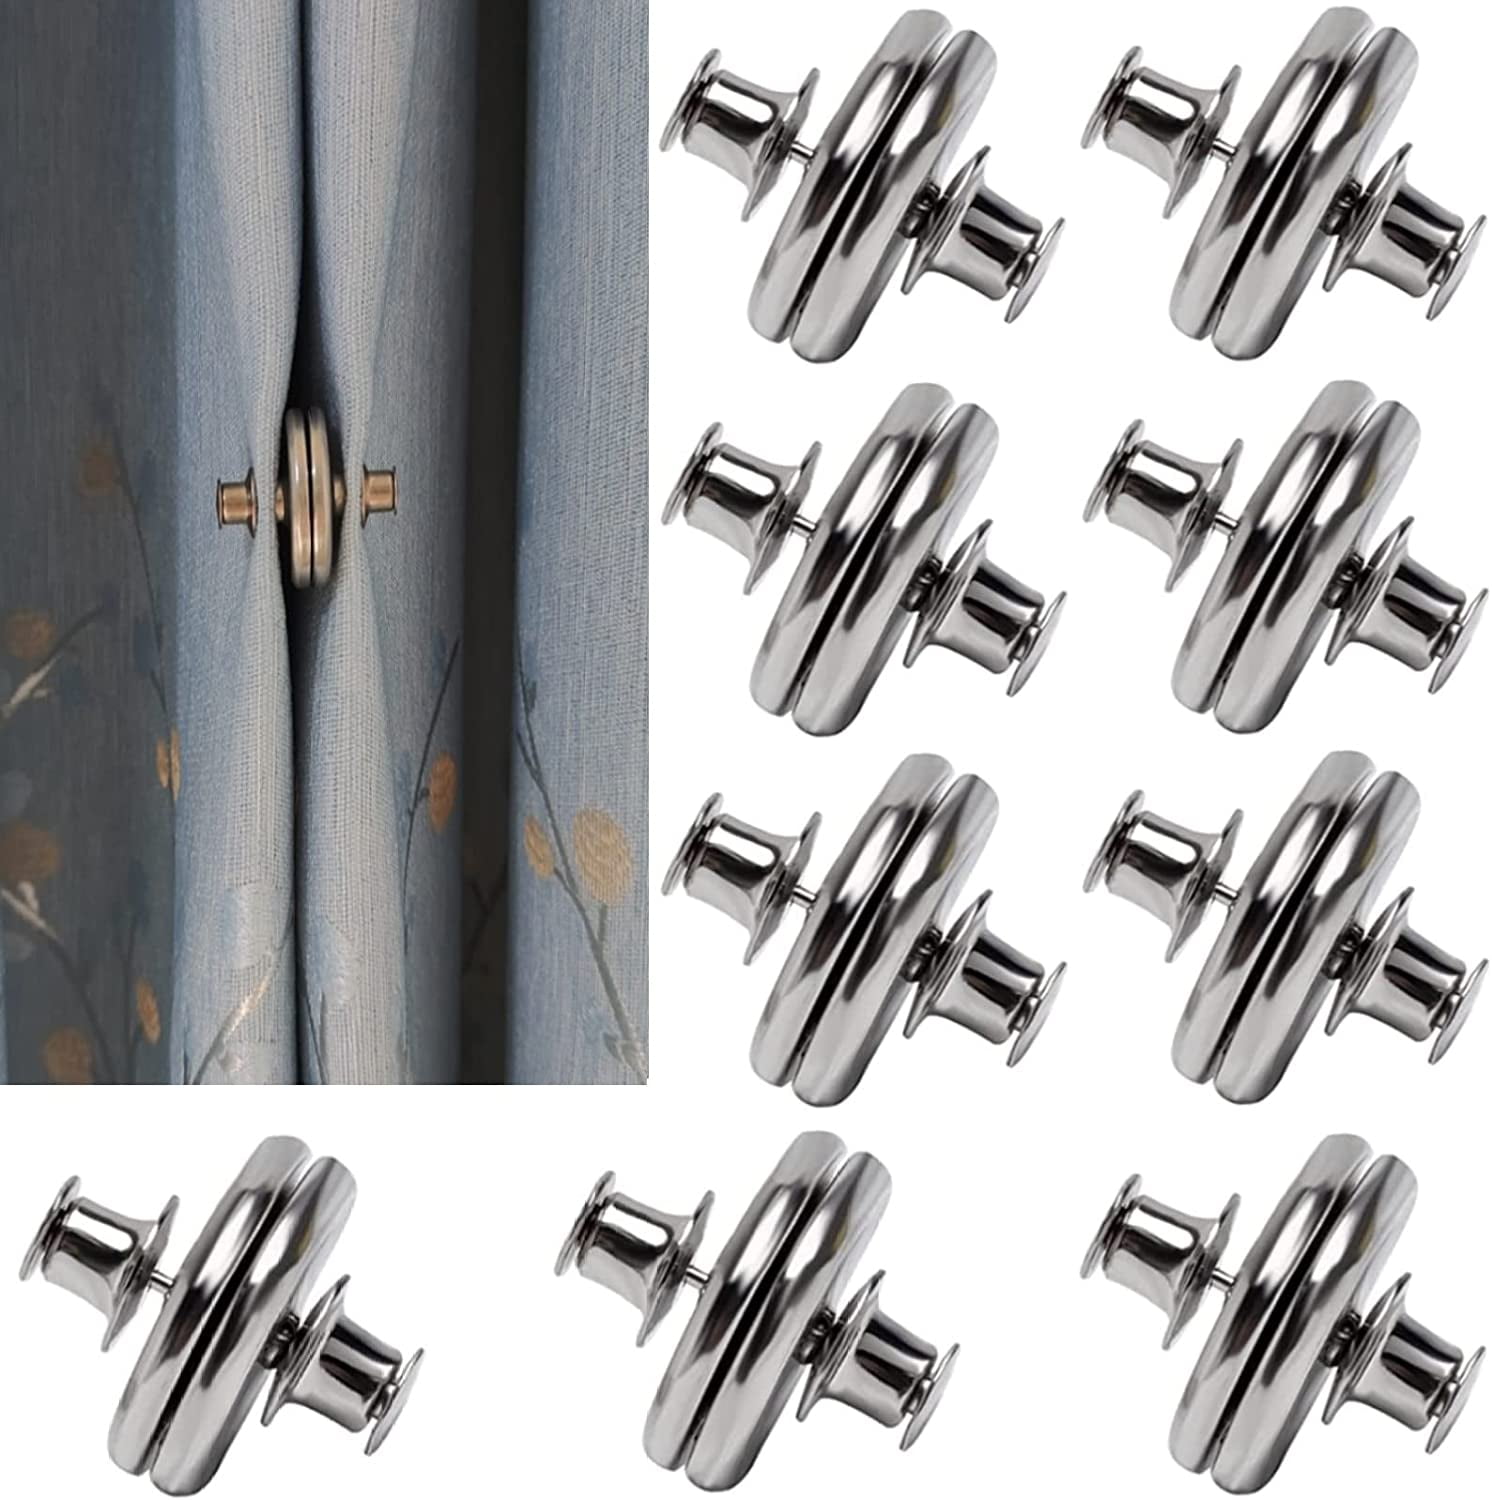 heylad 10 Pairs Curtain Magnets Closure, Magnetic Curtain Clips for Indoor  Outdoor Curtains Prevent Light Leaking, Strong Curtain Weights Magnets for